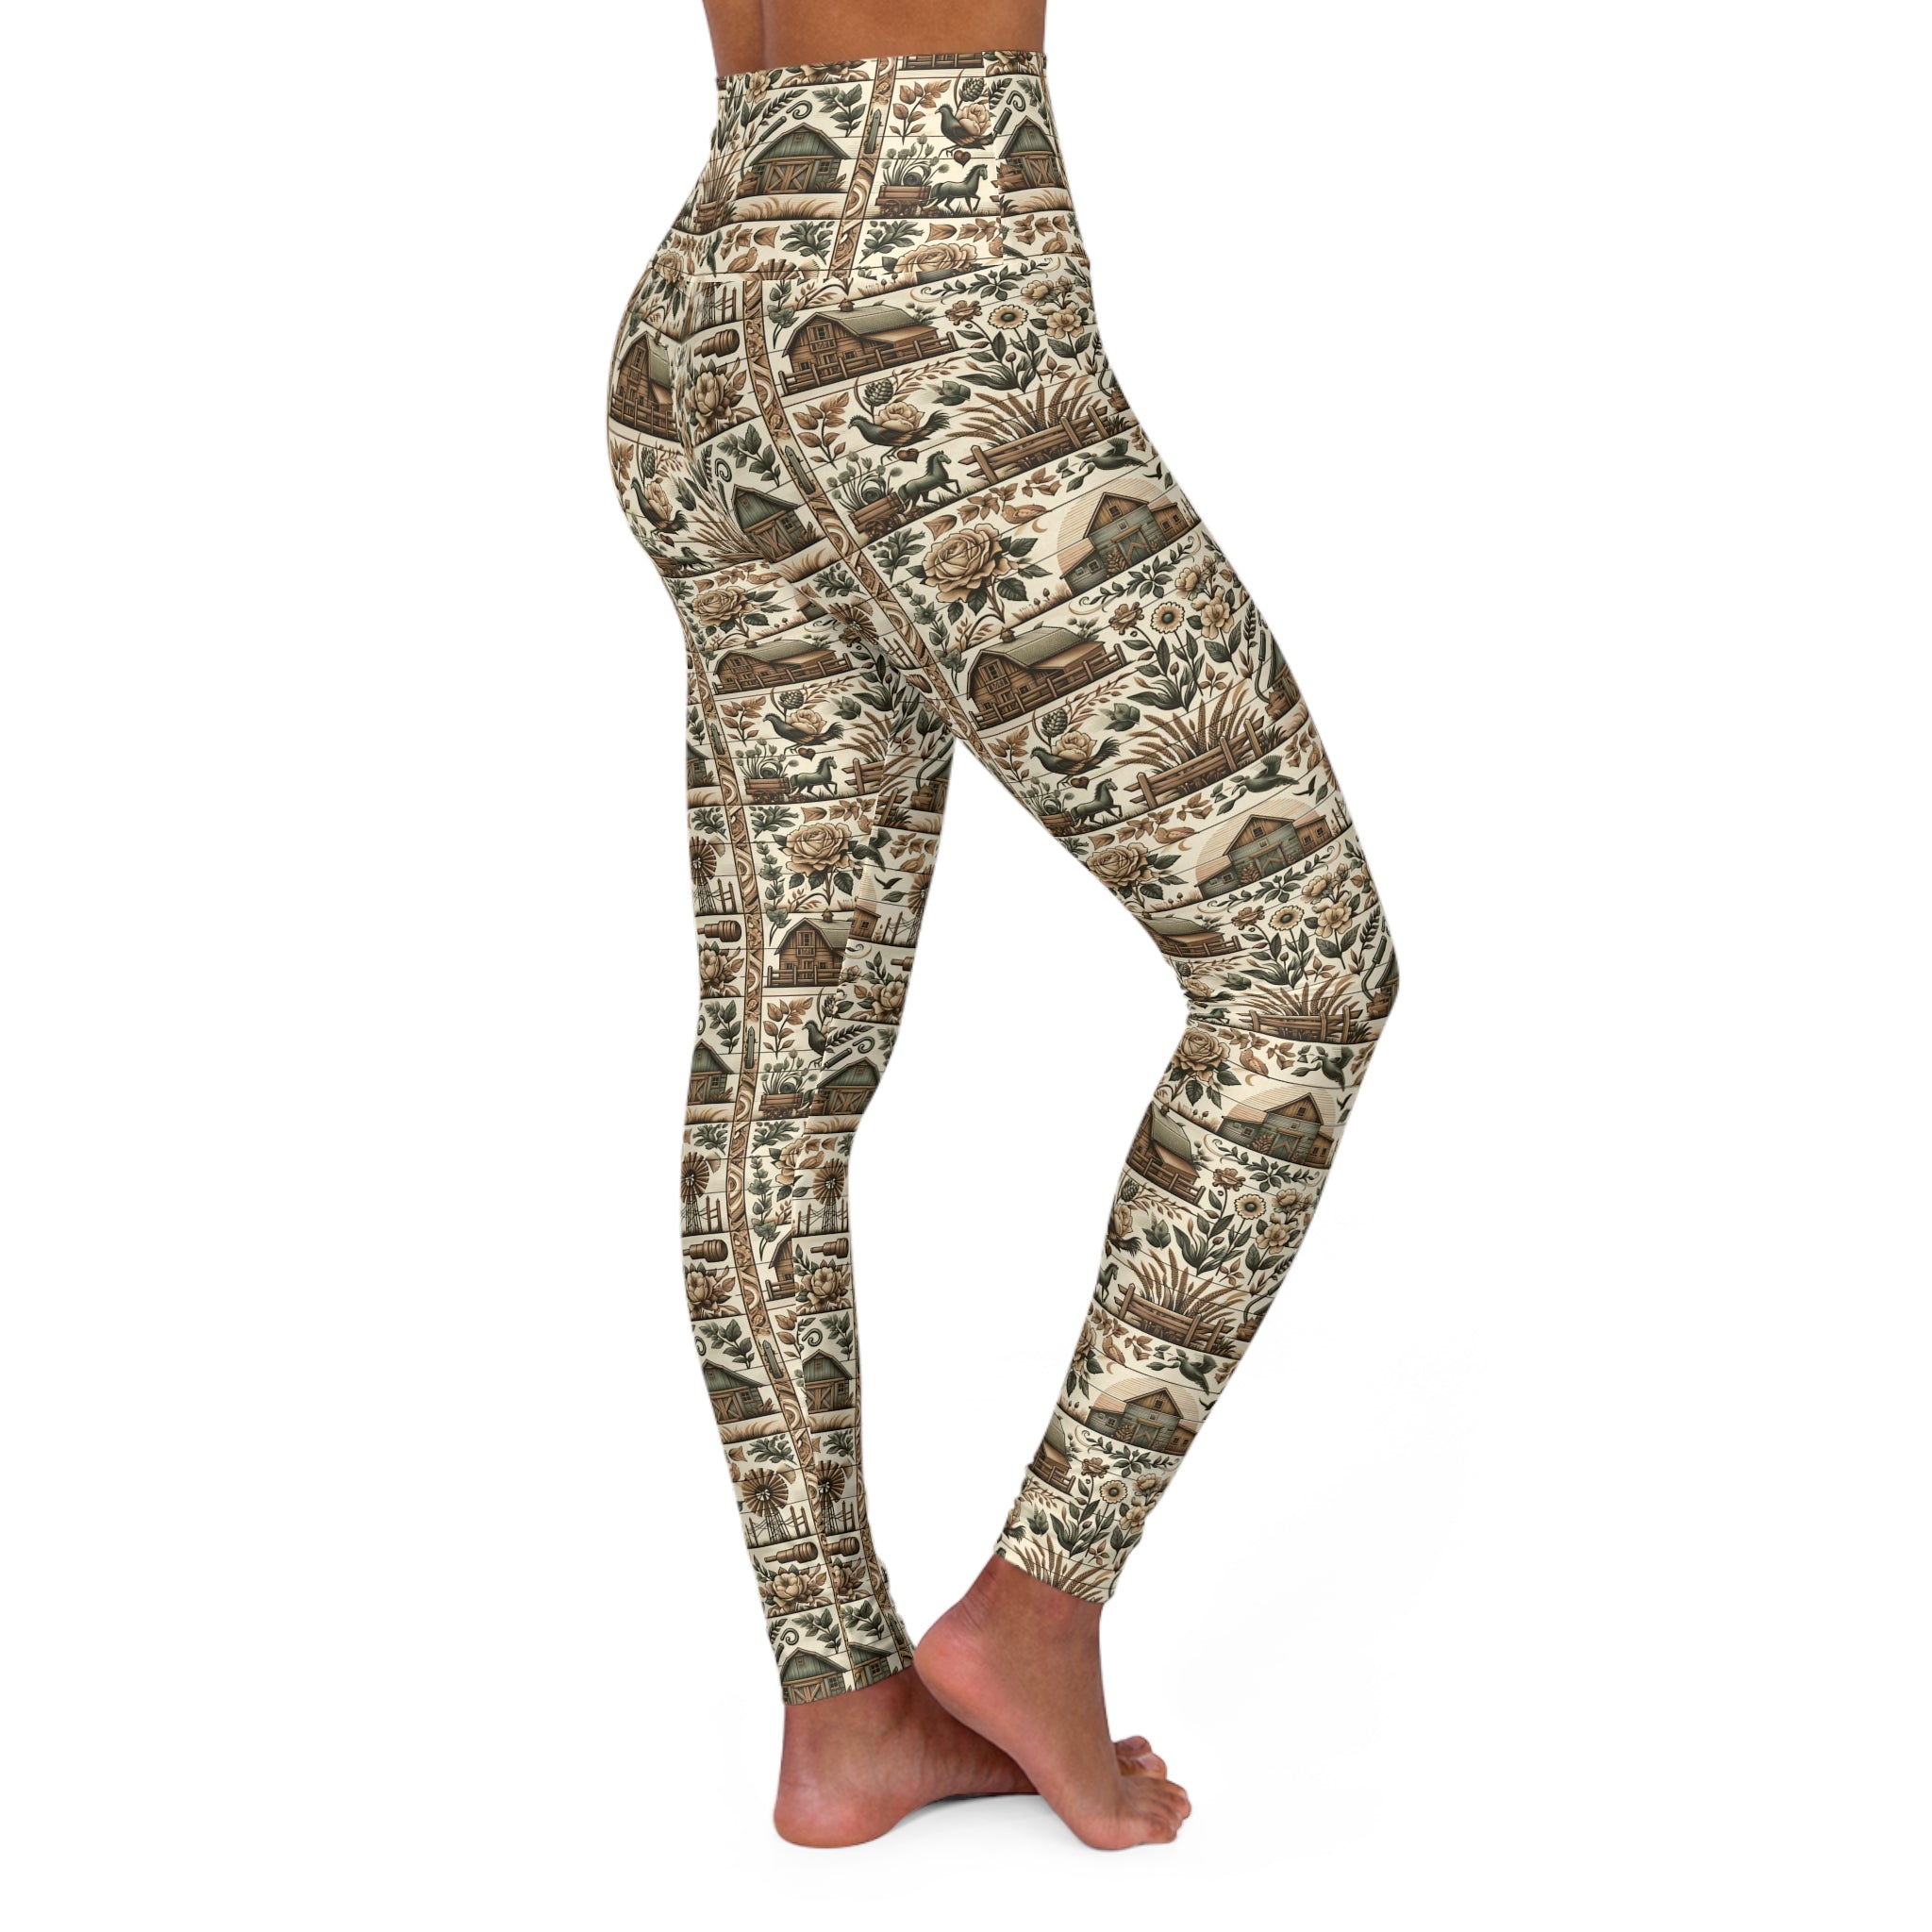 Rustic Country Gym Leggings for Women S-2XL - High Waist Fit